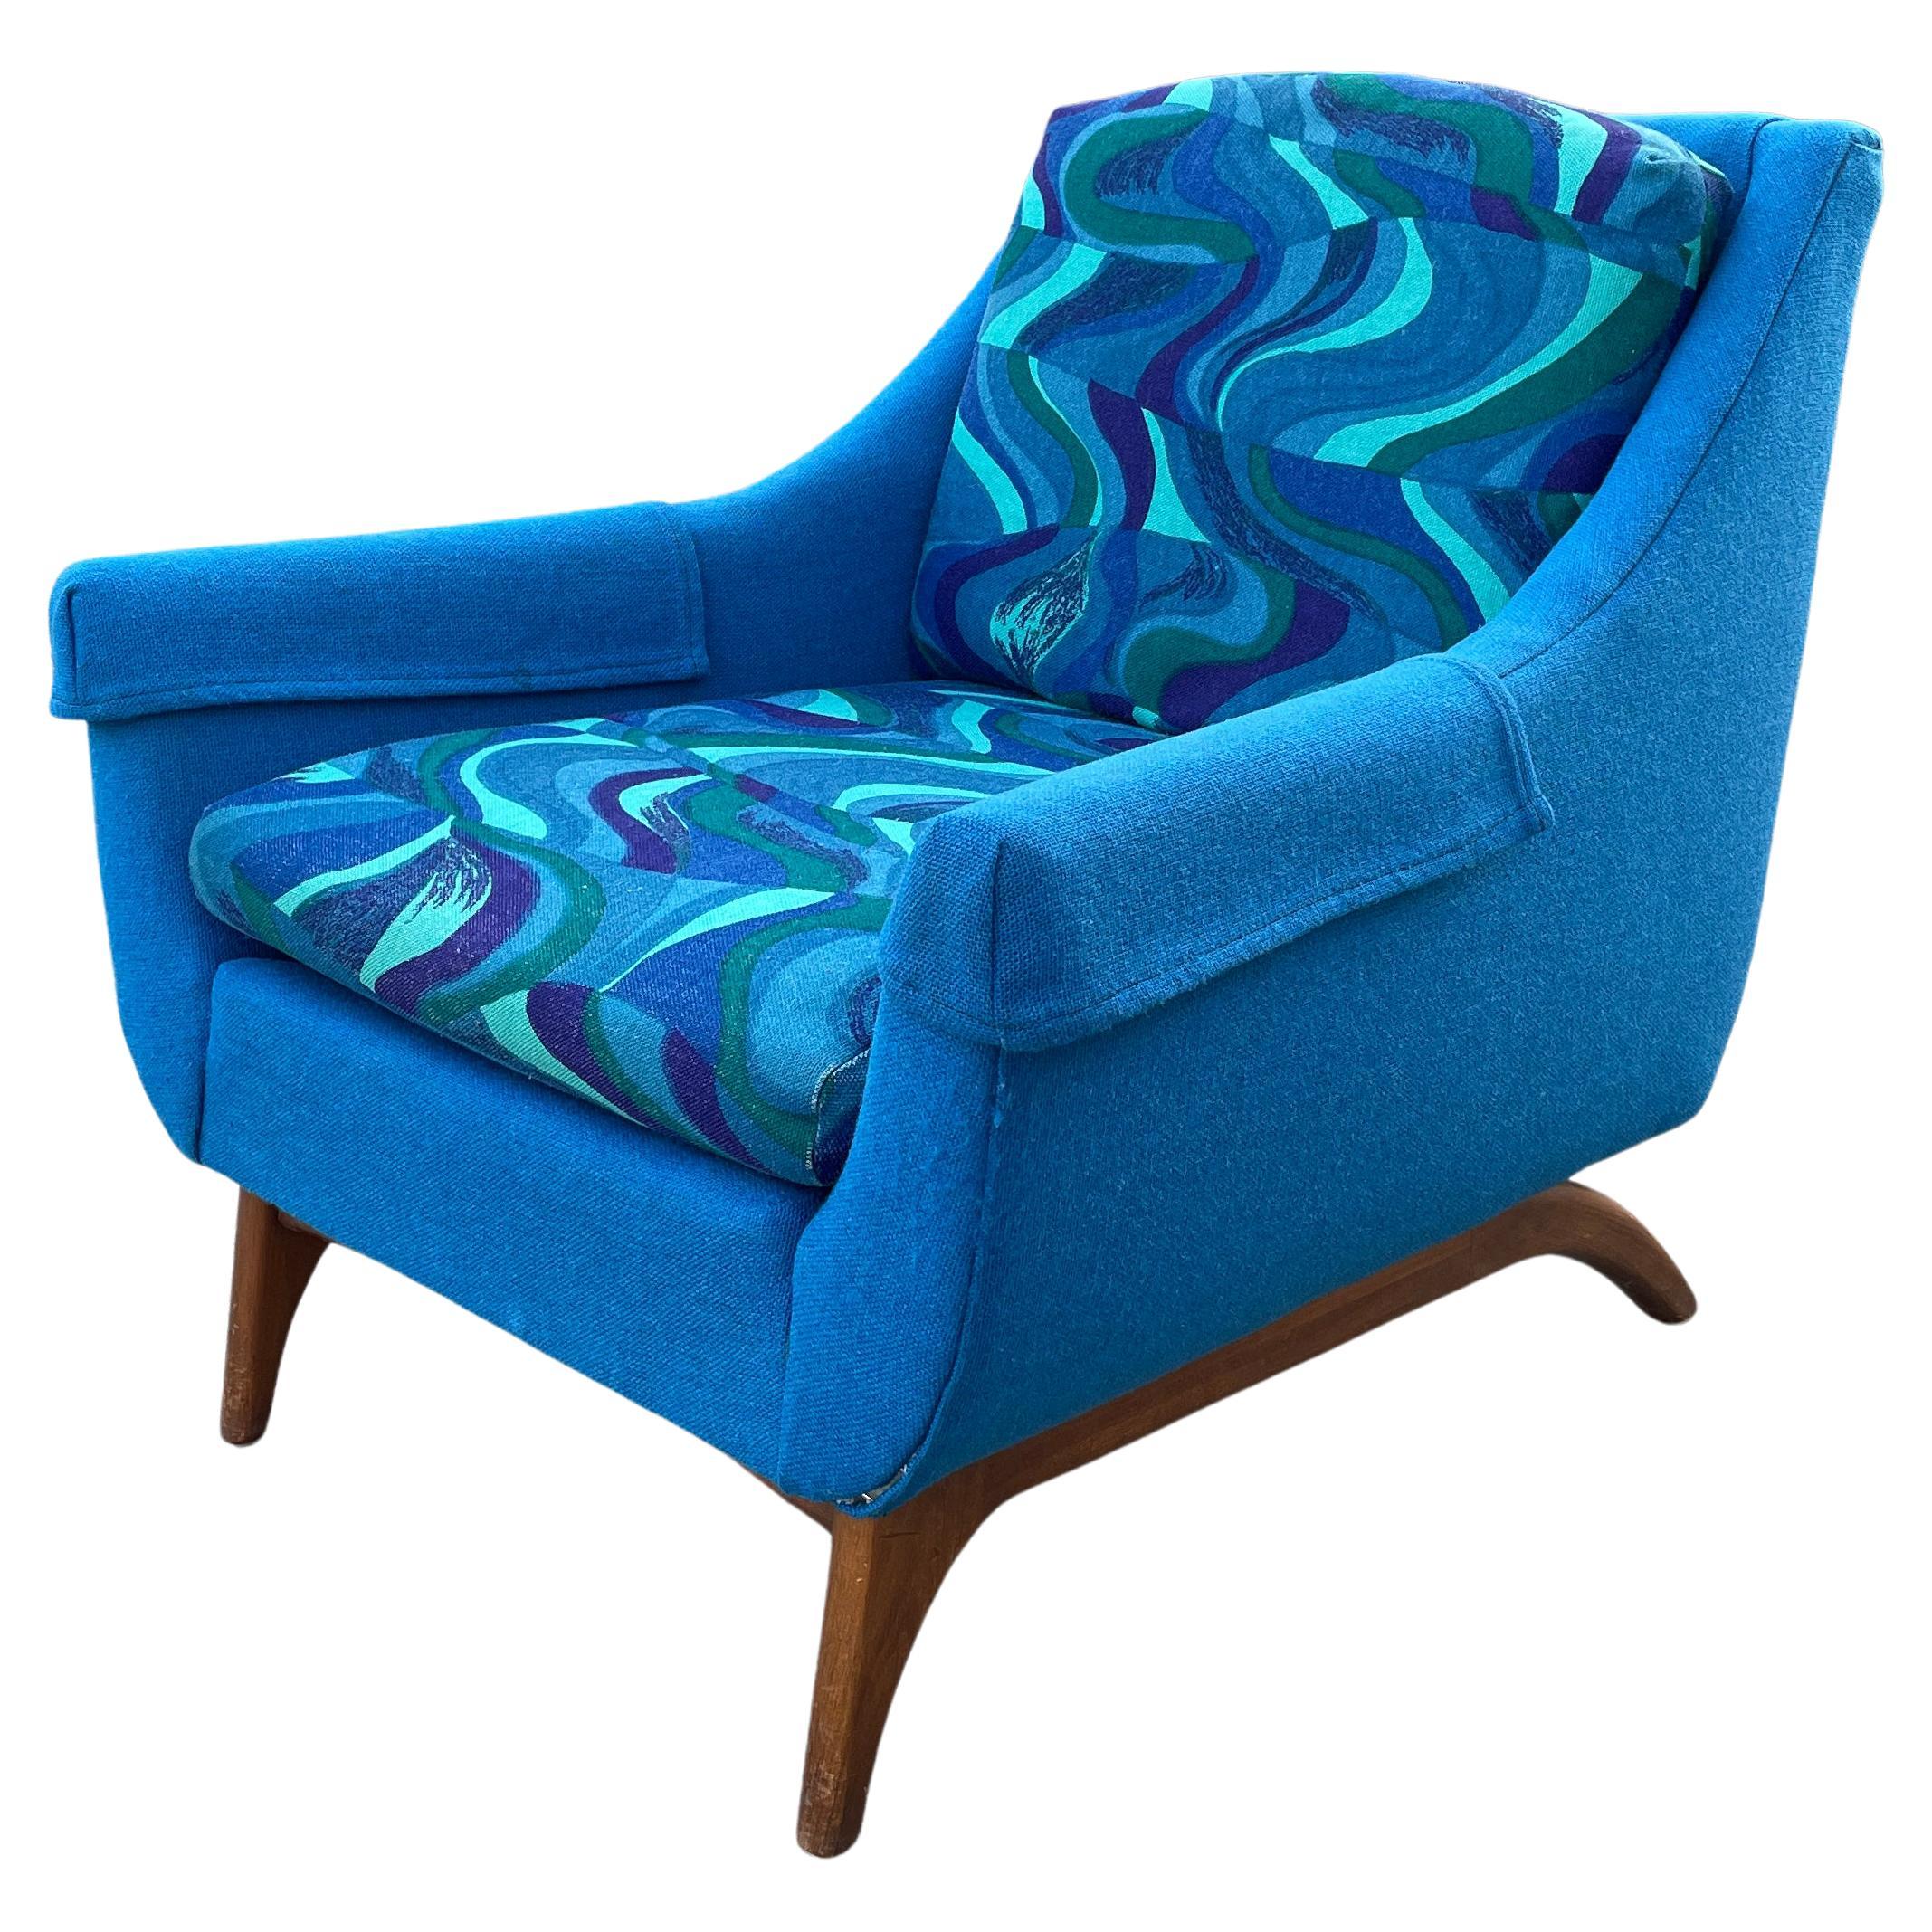 Vintage Rowe Furniture Psychedelic Midcentury Low Back Lounge Chair